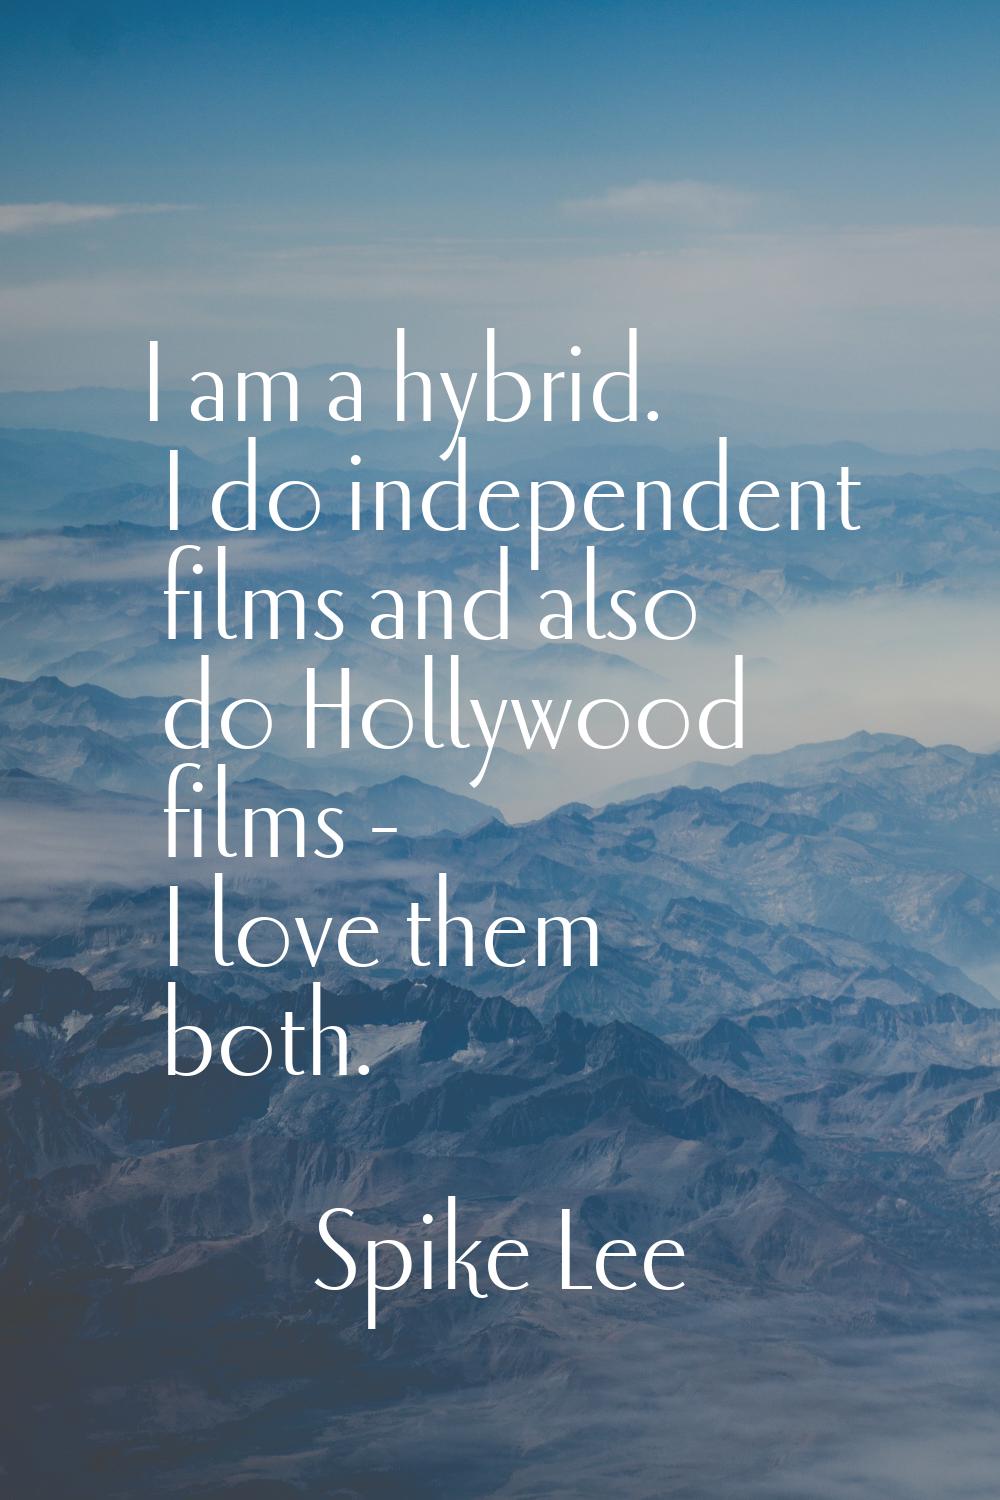 I am a hybrid. I do independent films and also do Hollywood films - I love them both.